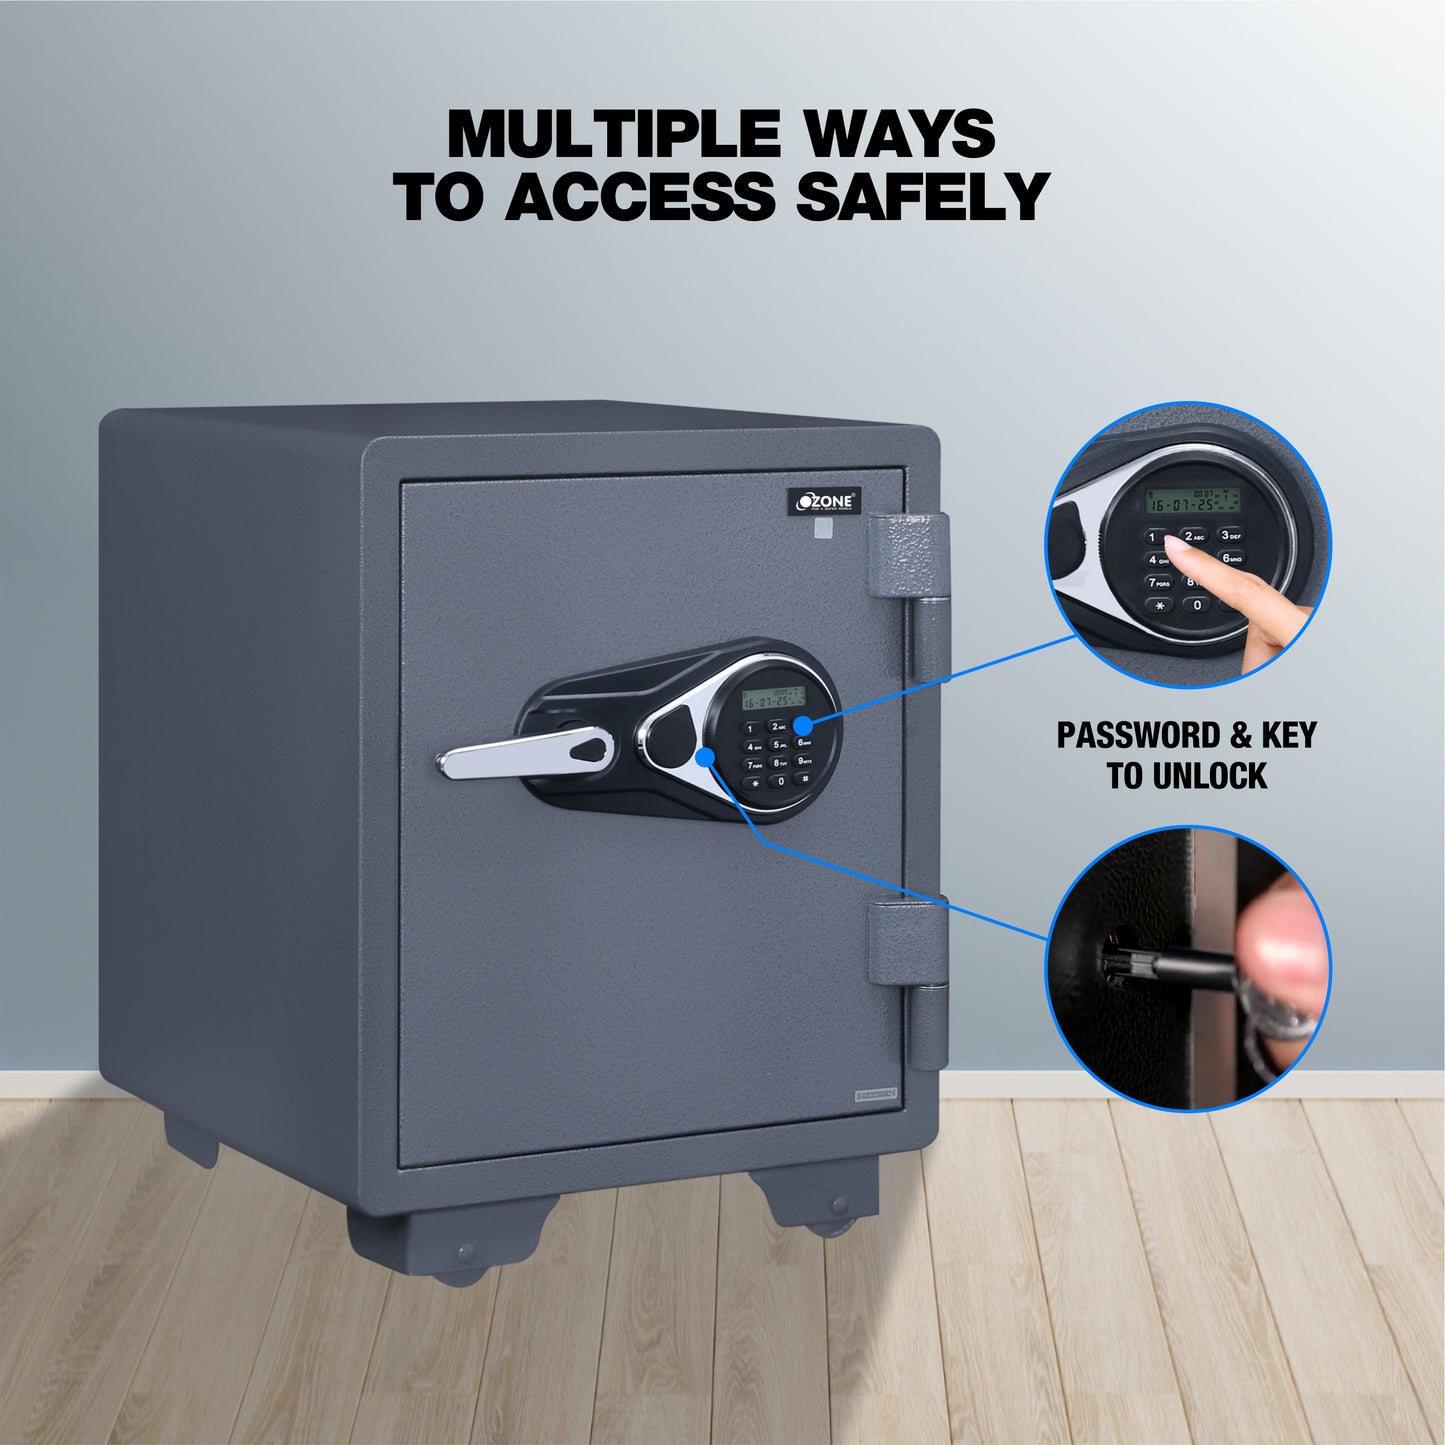 Ozone Fire-resistant Safe for Homes & Offices | 2-way Access | Password & Emergency Key (39 Ltrs.)